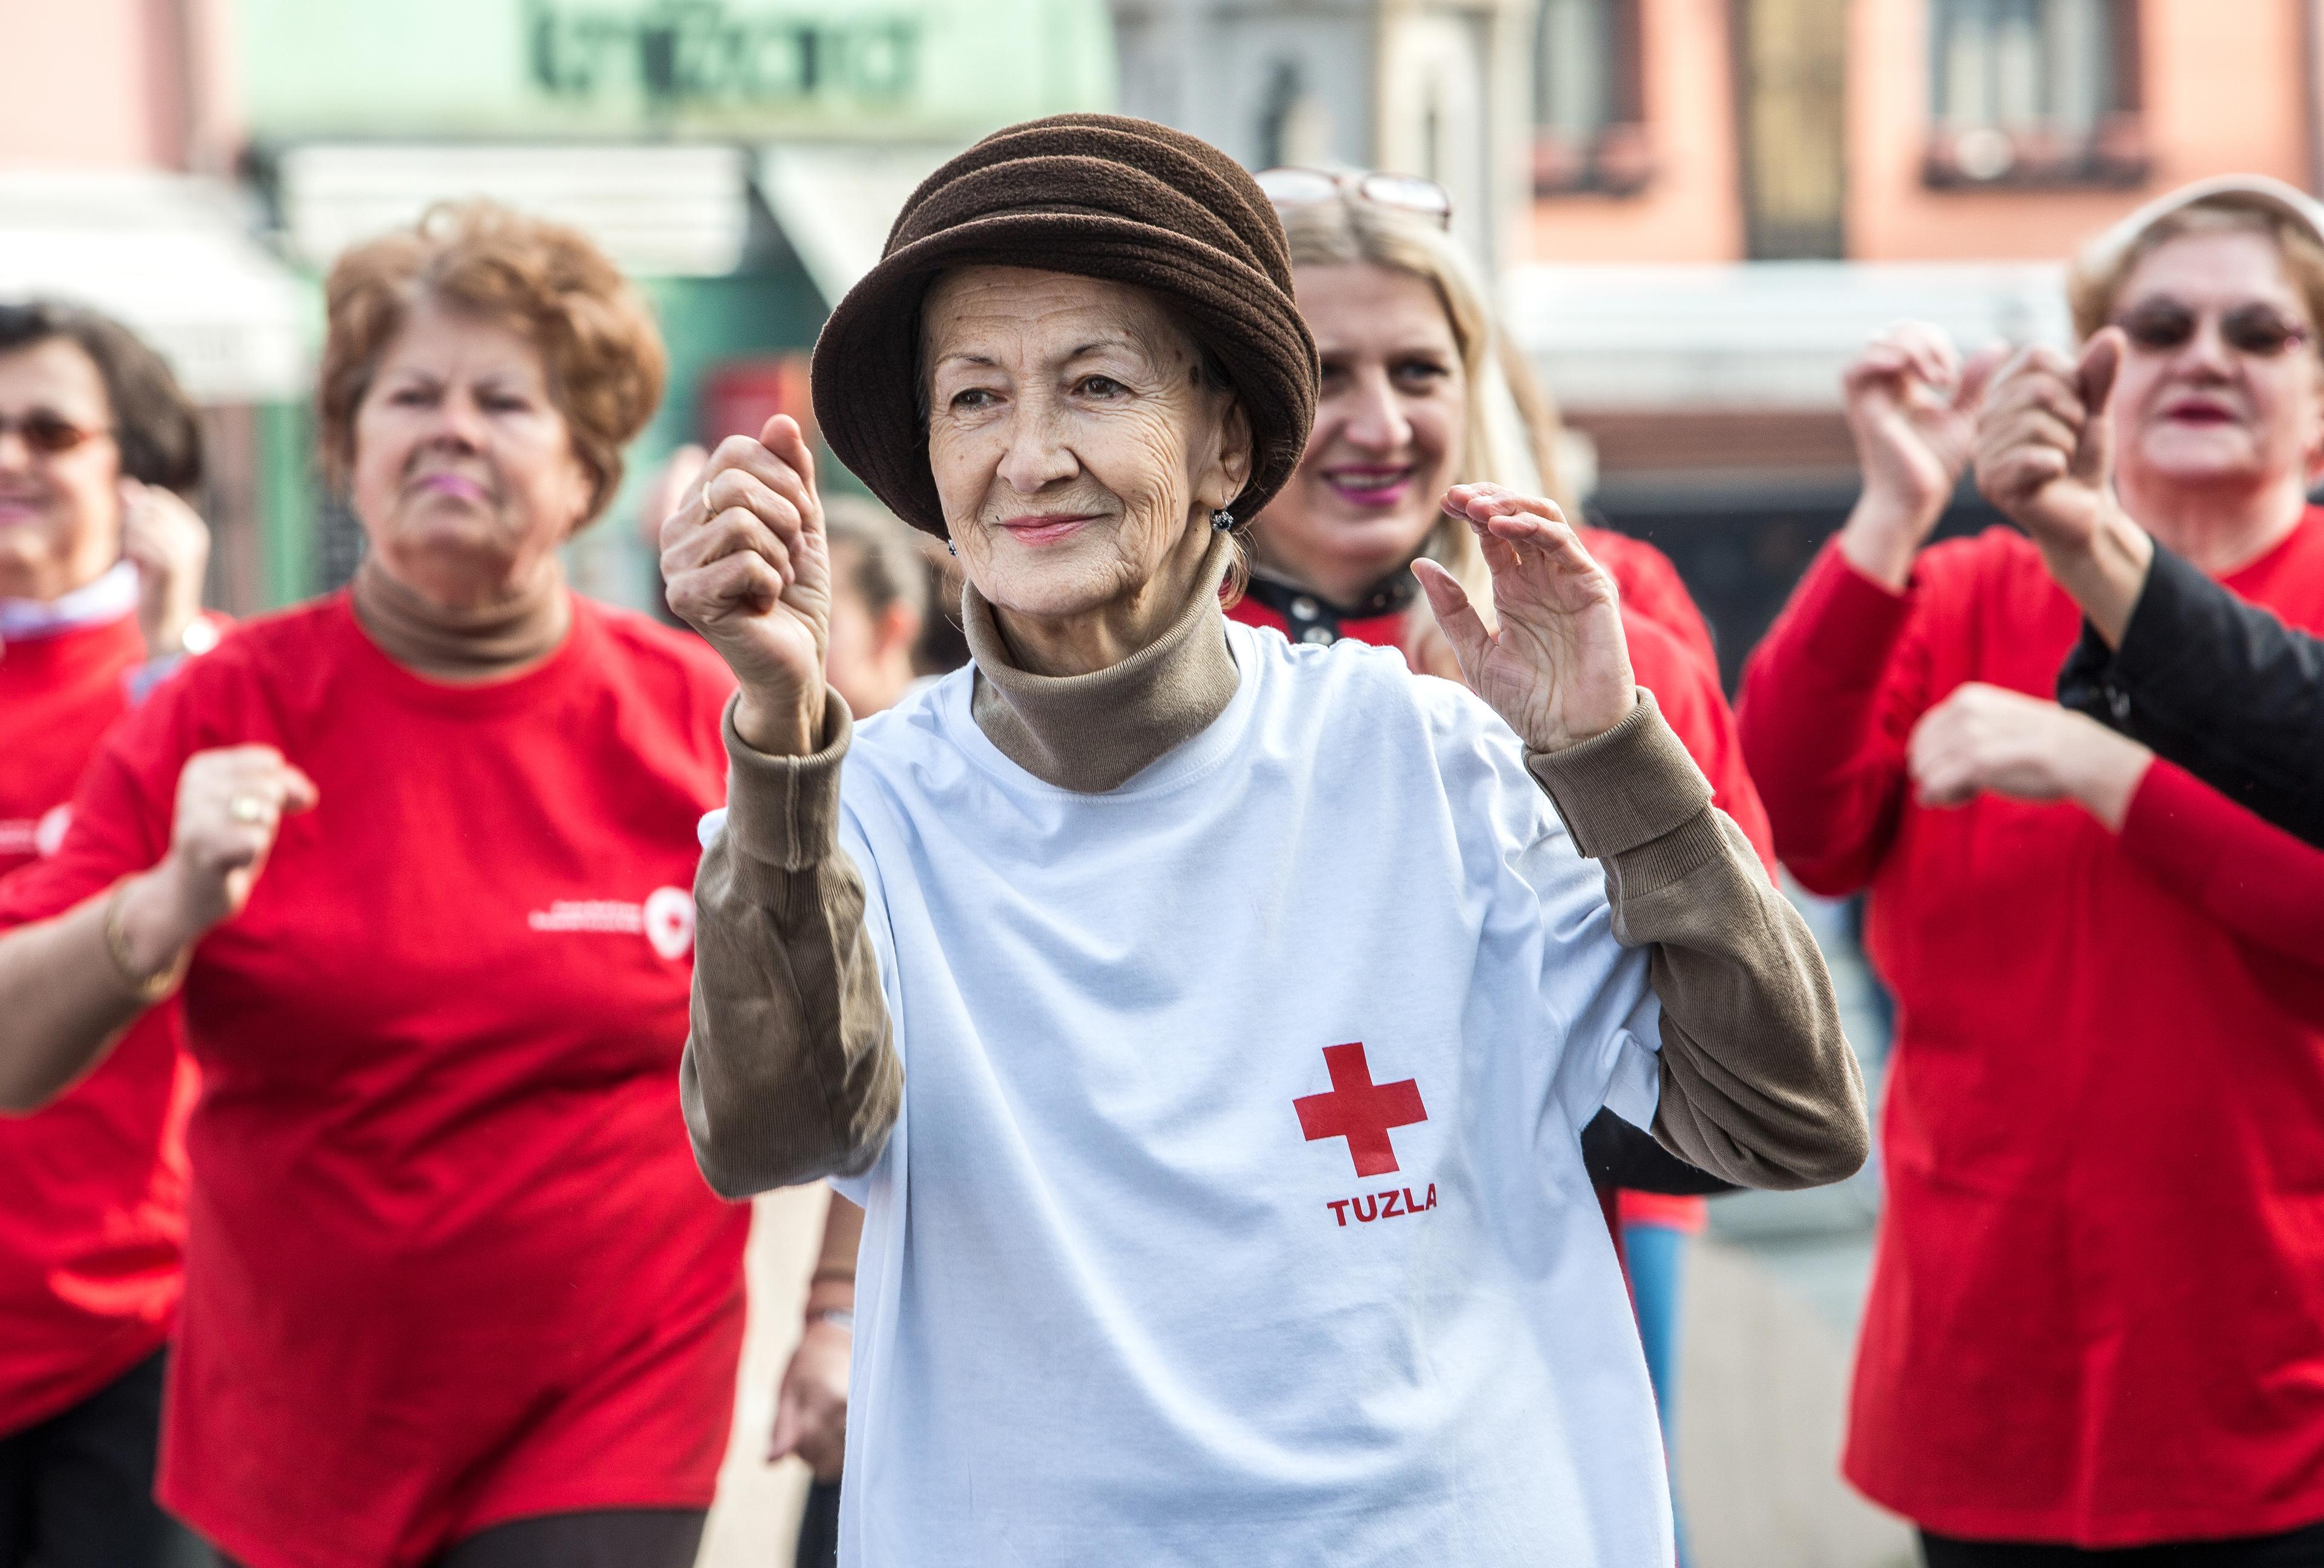 Elderly women exercising. They seem to enjoy the sport. An elderly lady wears a hat and a T-shirt with the Red Cross Tuzla (Bosnia).